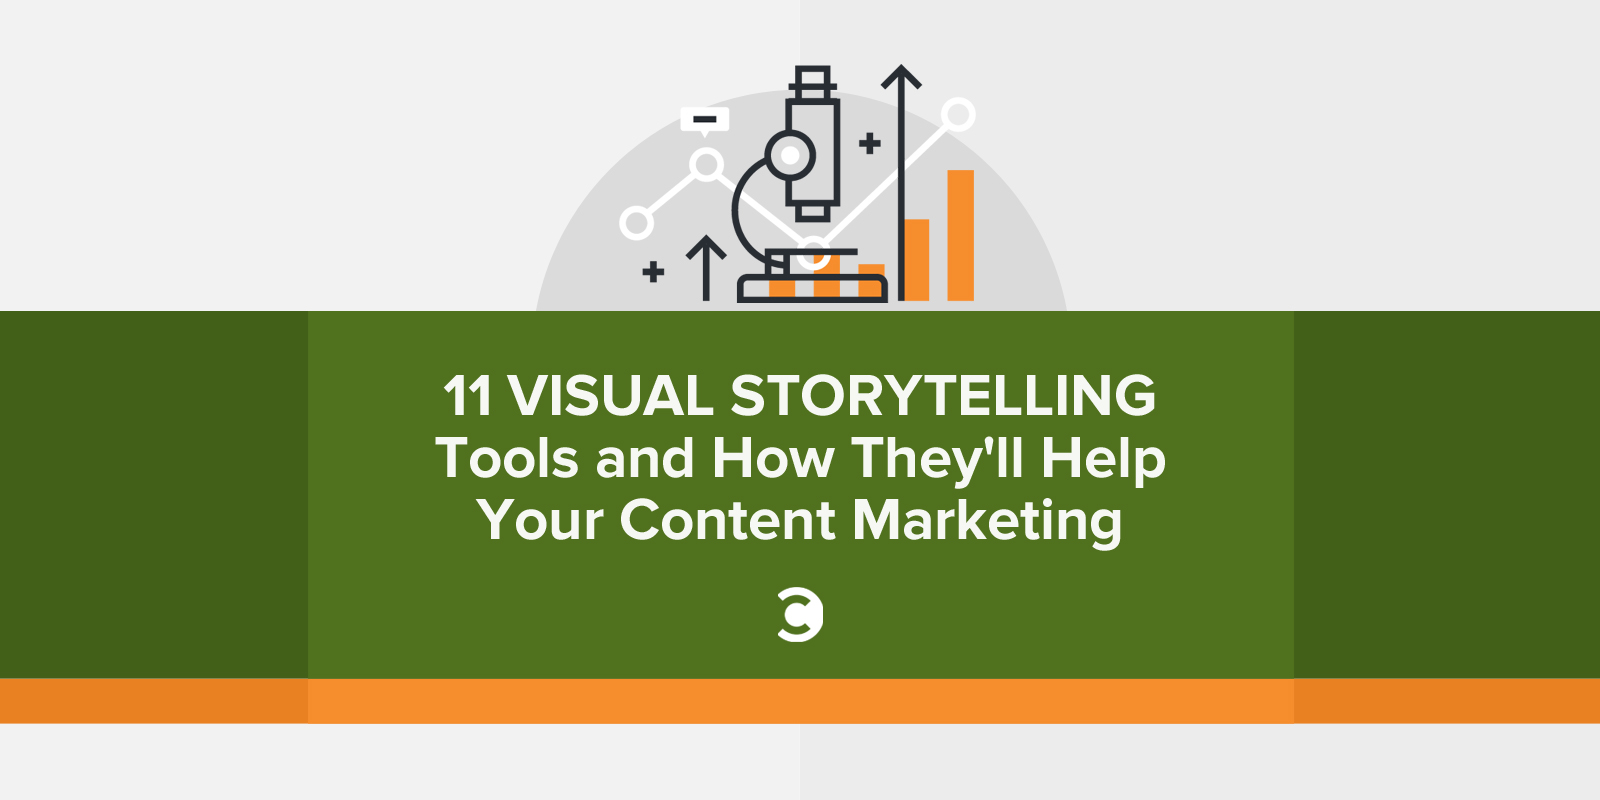 11 Visual Storytelling Tools and How They’ll Help Your Content Marketing